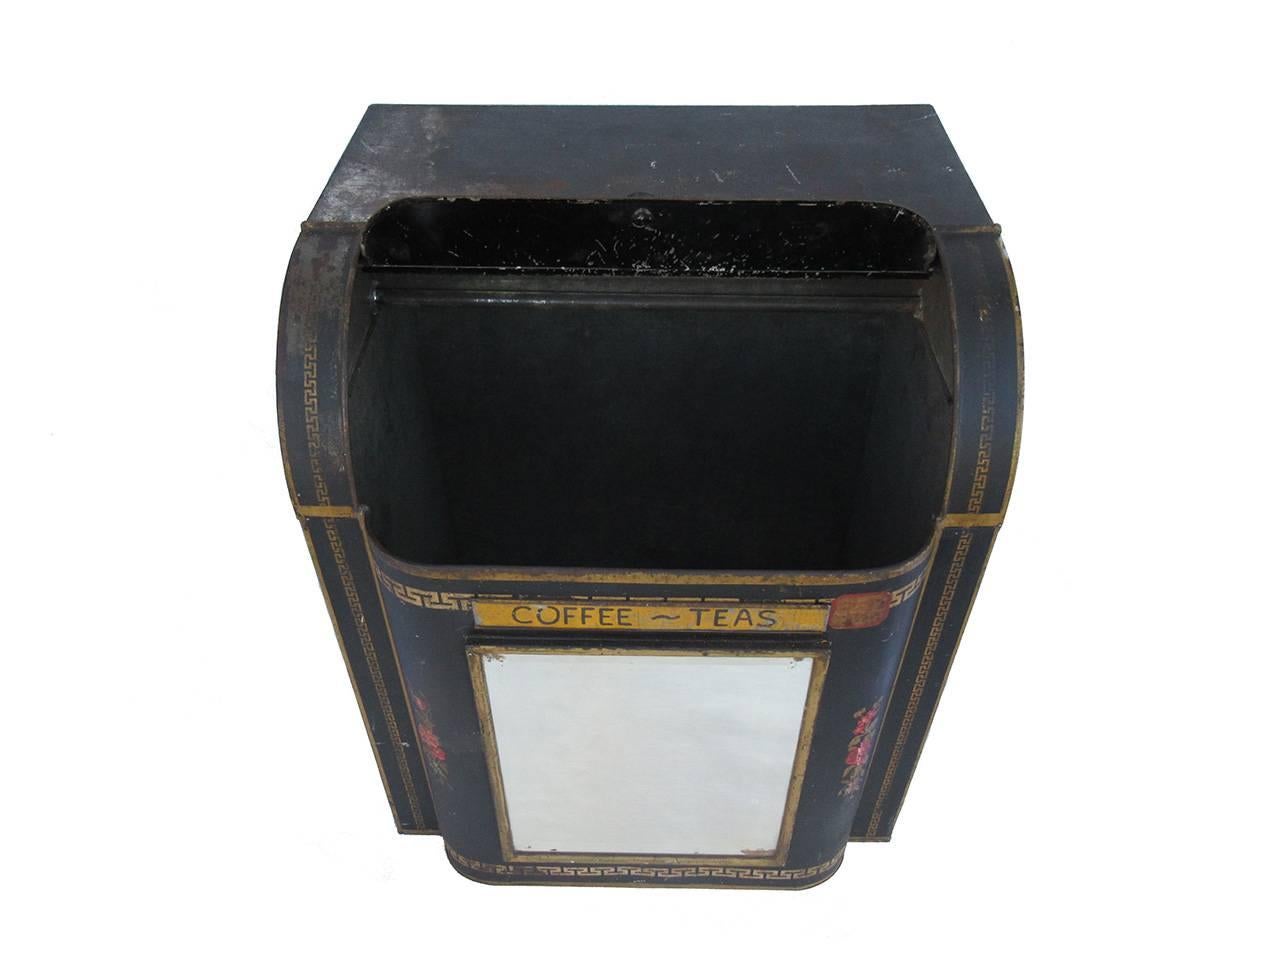 Turn of the century tin 'Coffee and Teas' bin with retractable lid, insert mirror on the front, black painted surface with gold gilt filagree decoration, all in as found surface and condition